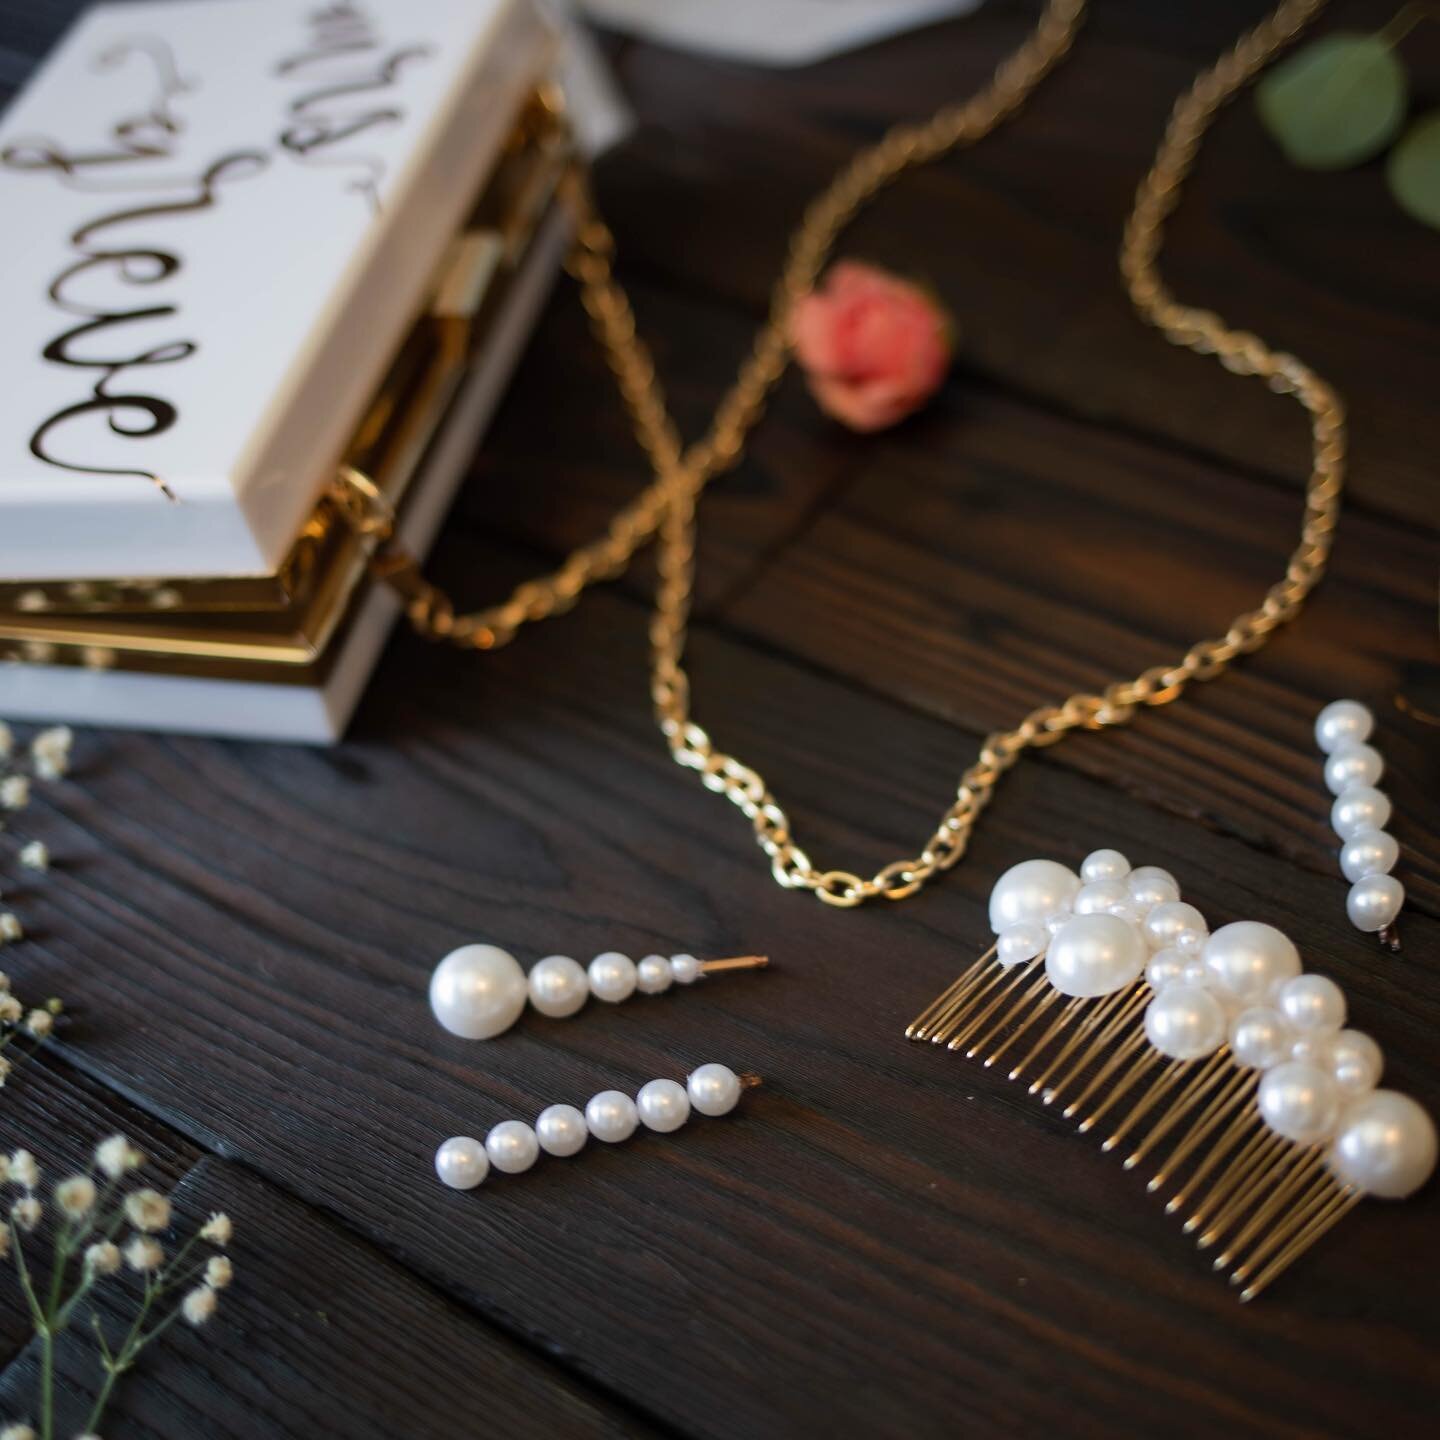 Did you see my #diy pearl pins? If not it&rsquo;s saved in my stories! More bride DIYs are coming 👰🏻🎉